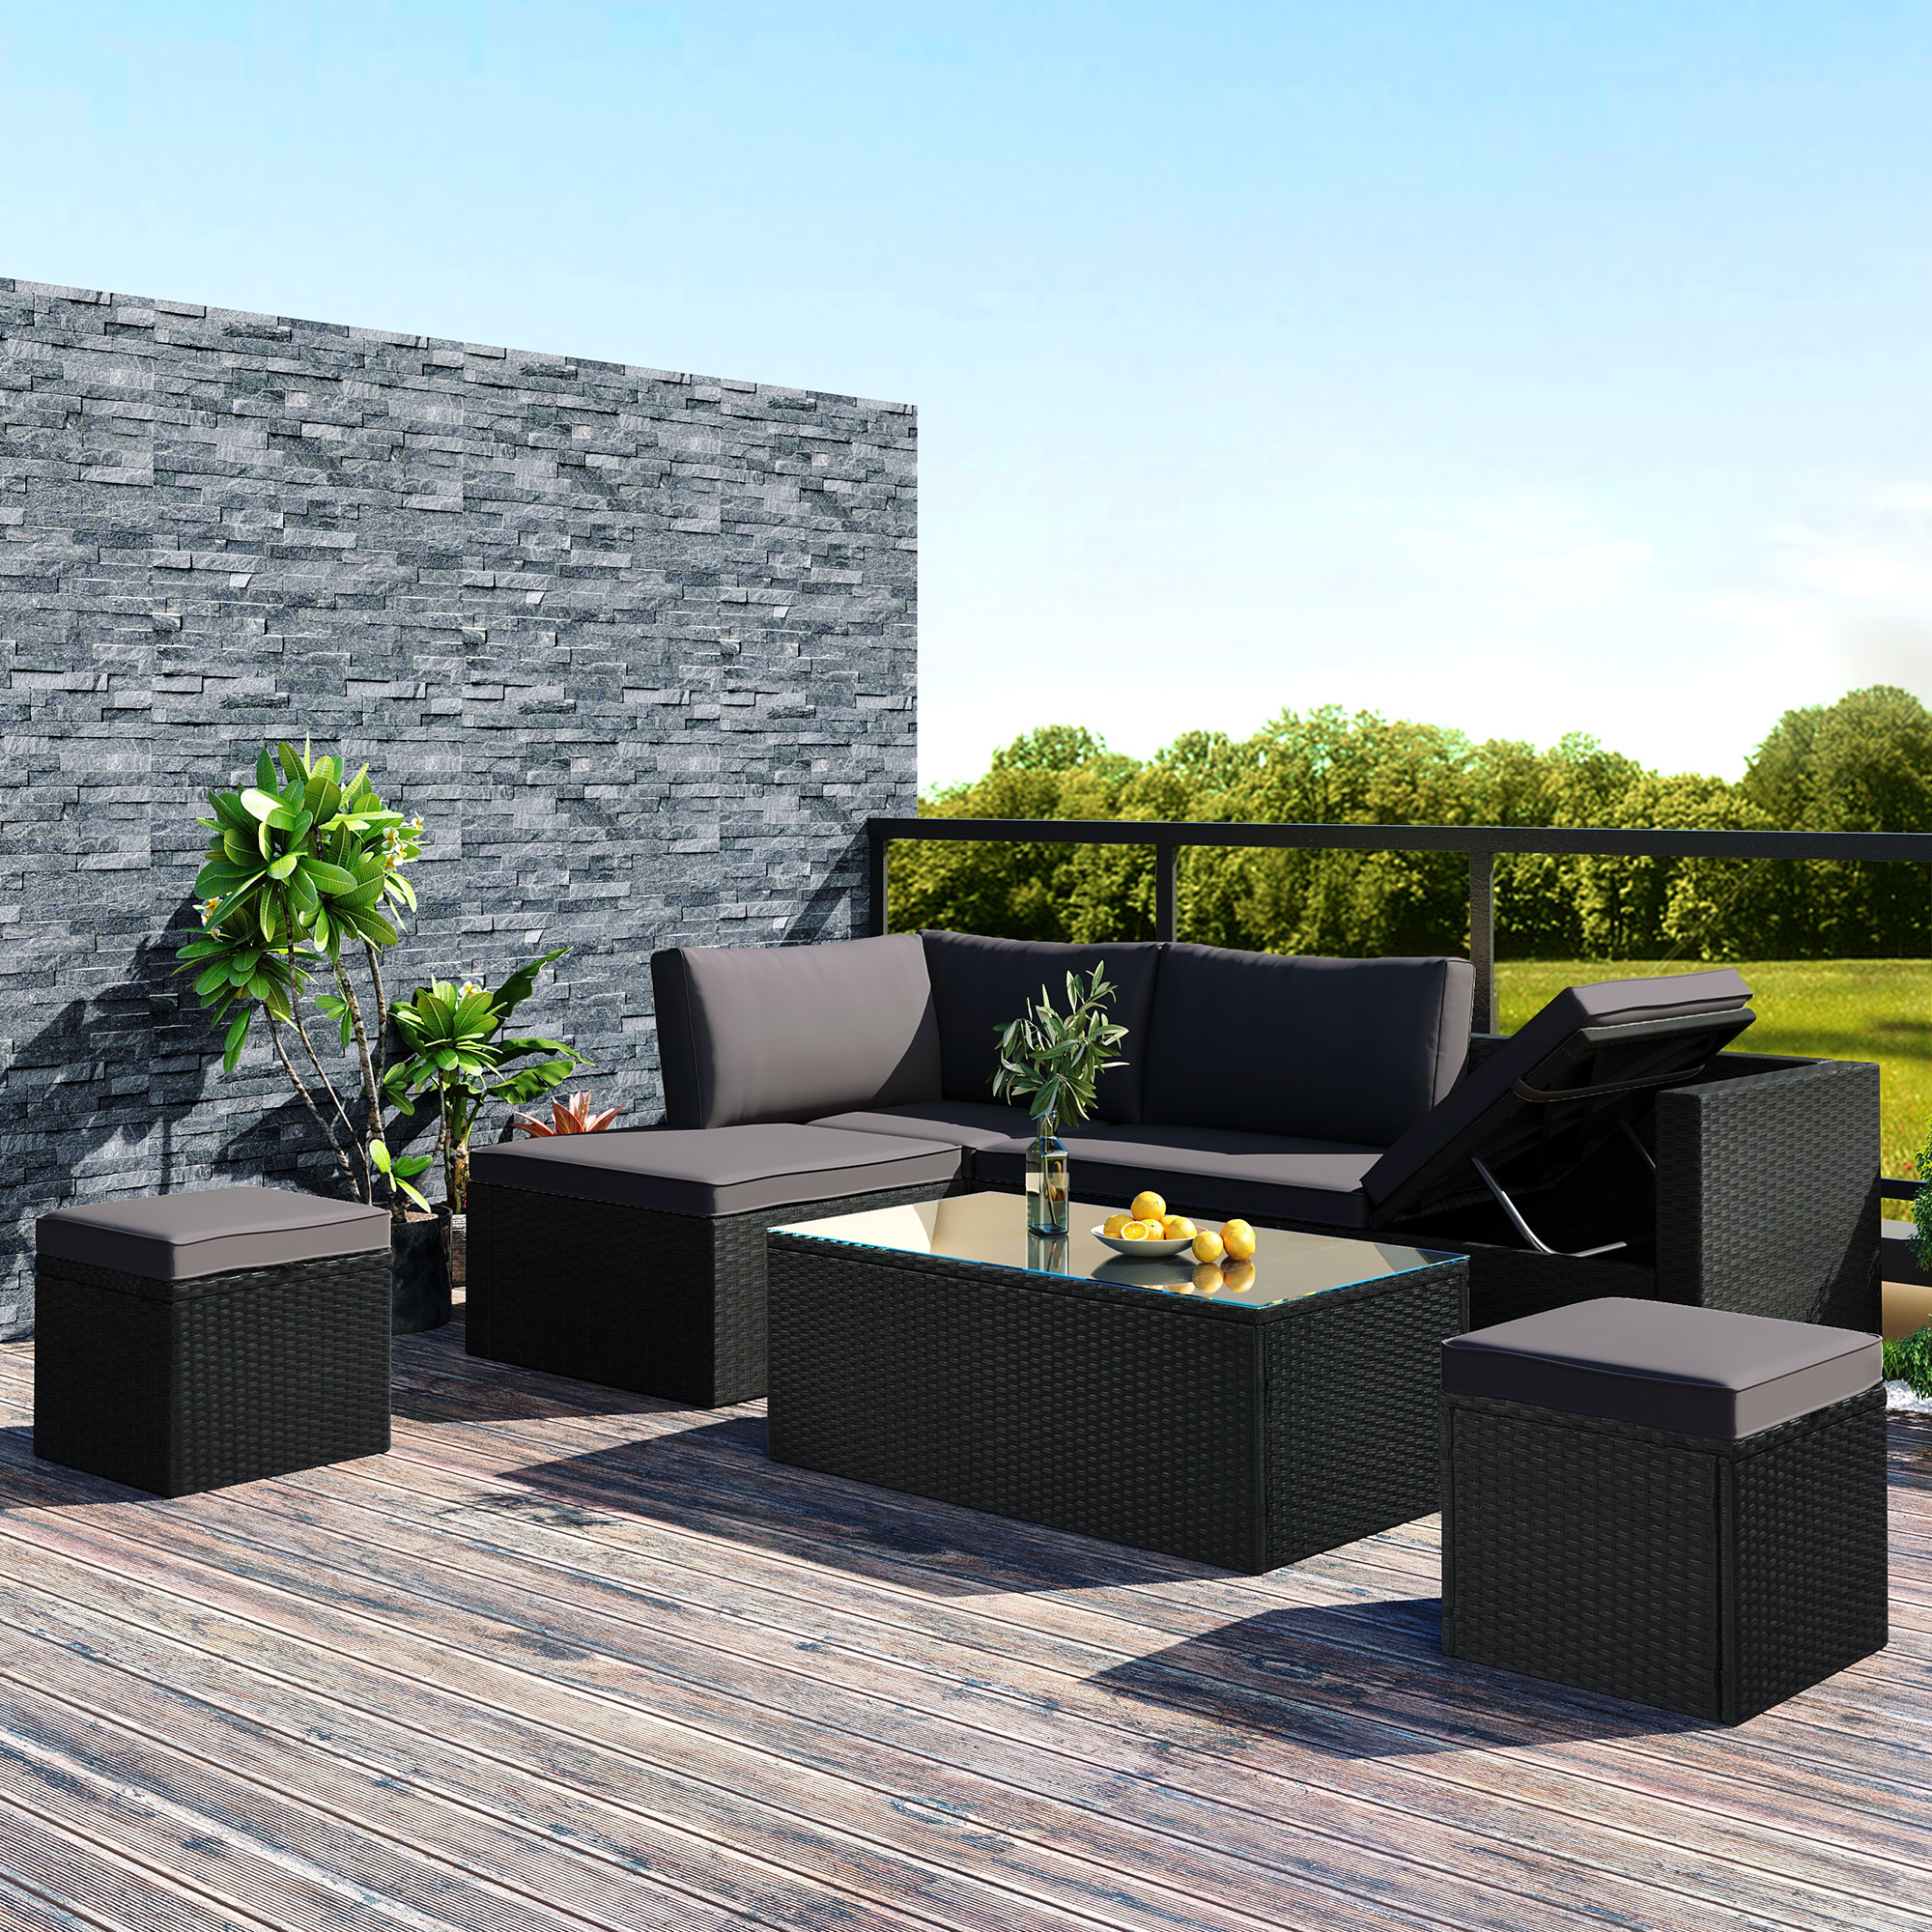 Large Outdoor Wicker Sofa Set, PE Rattan, Movable Cushion, Sectional Lounger Sofa, For Backyard, Porch, Pool, Gray.-Boyel Living